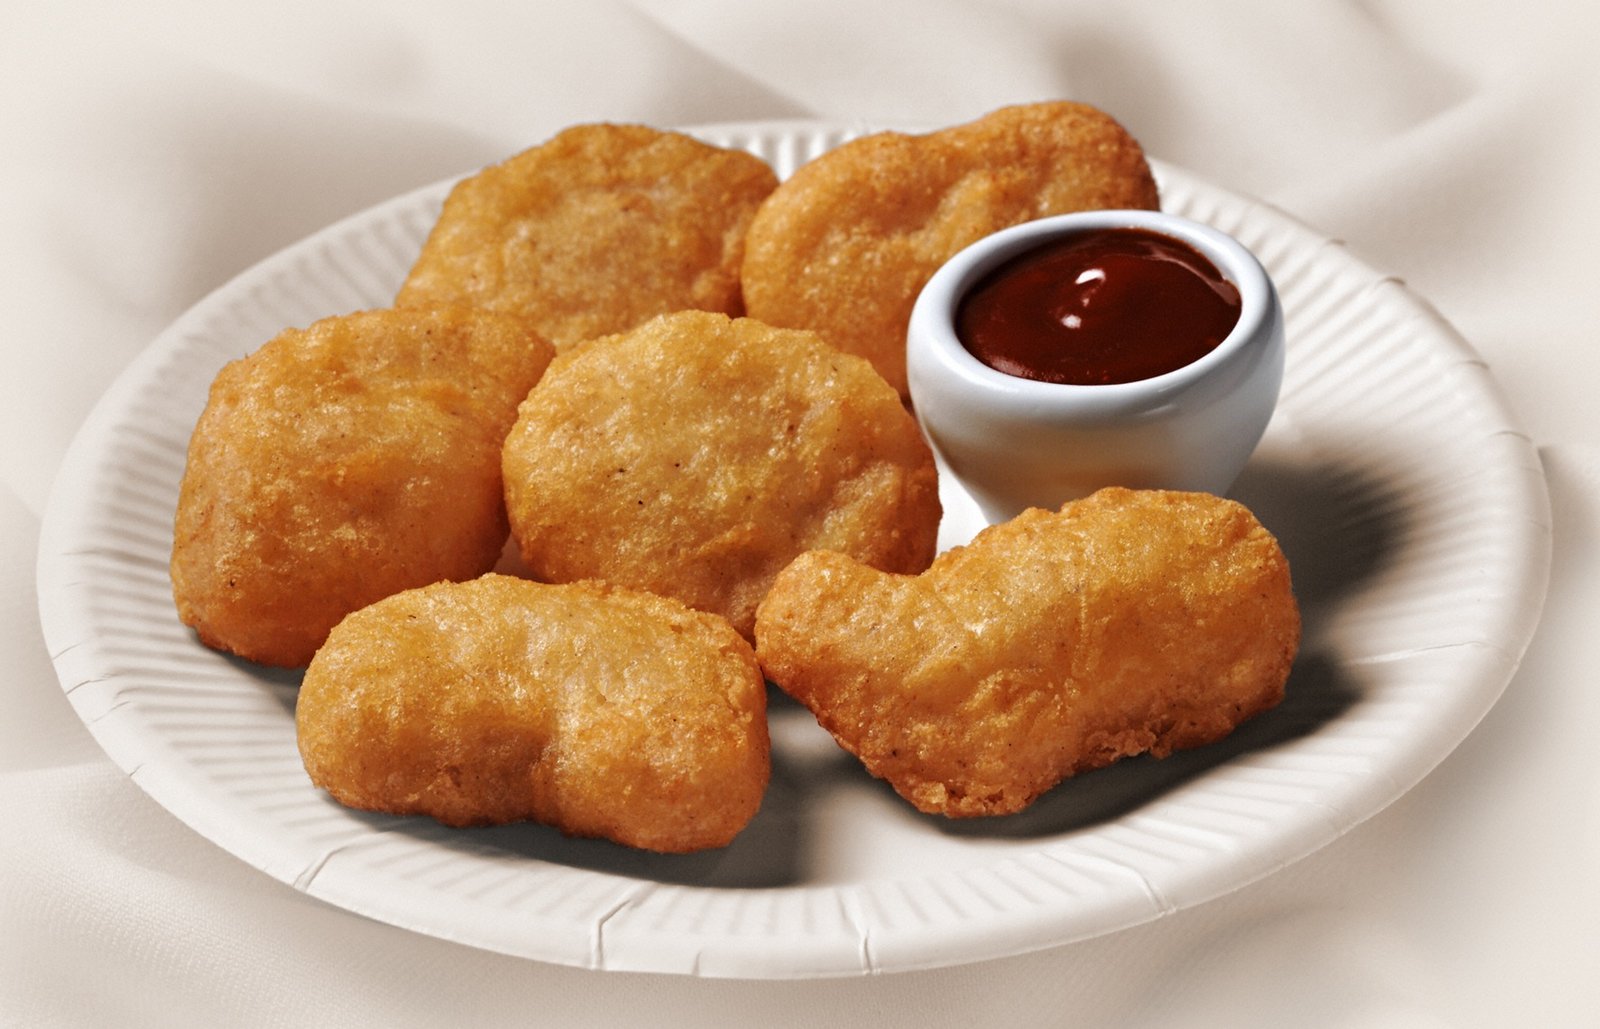 McNuggets come in four official shapes: bell, bone, boot and ball.